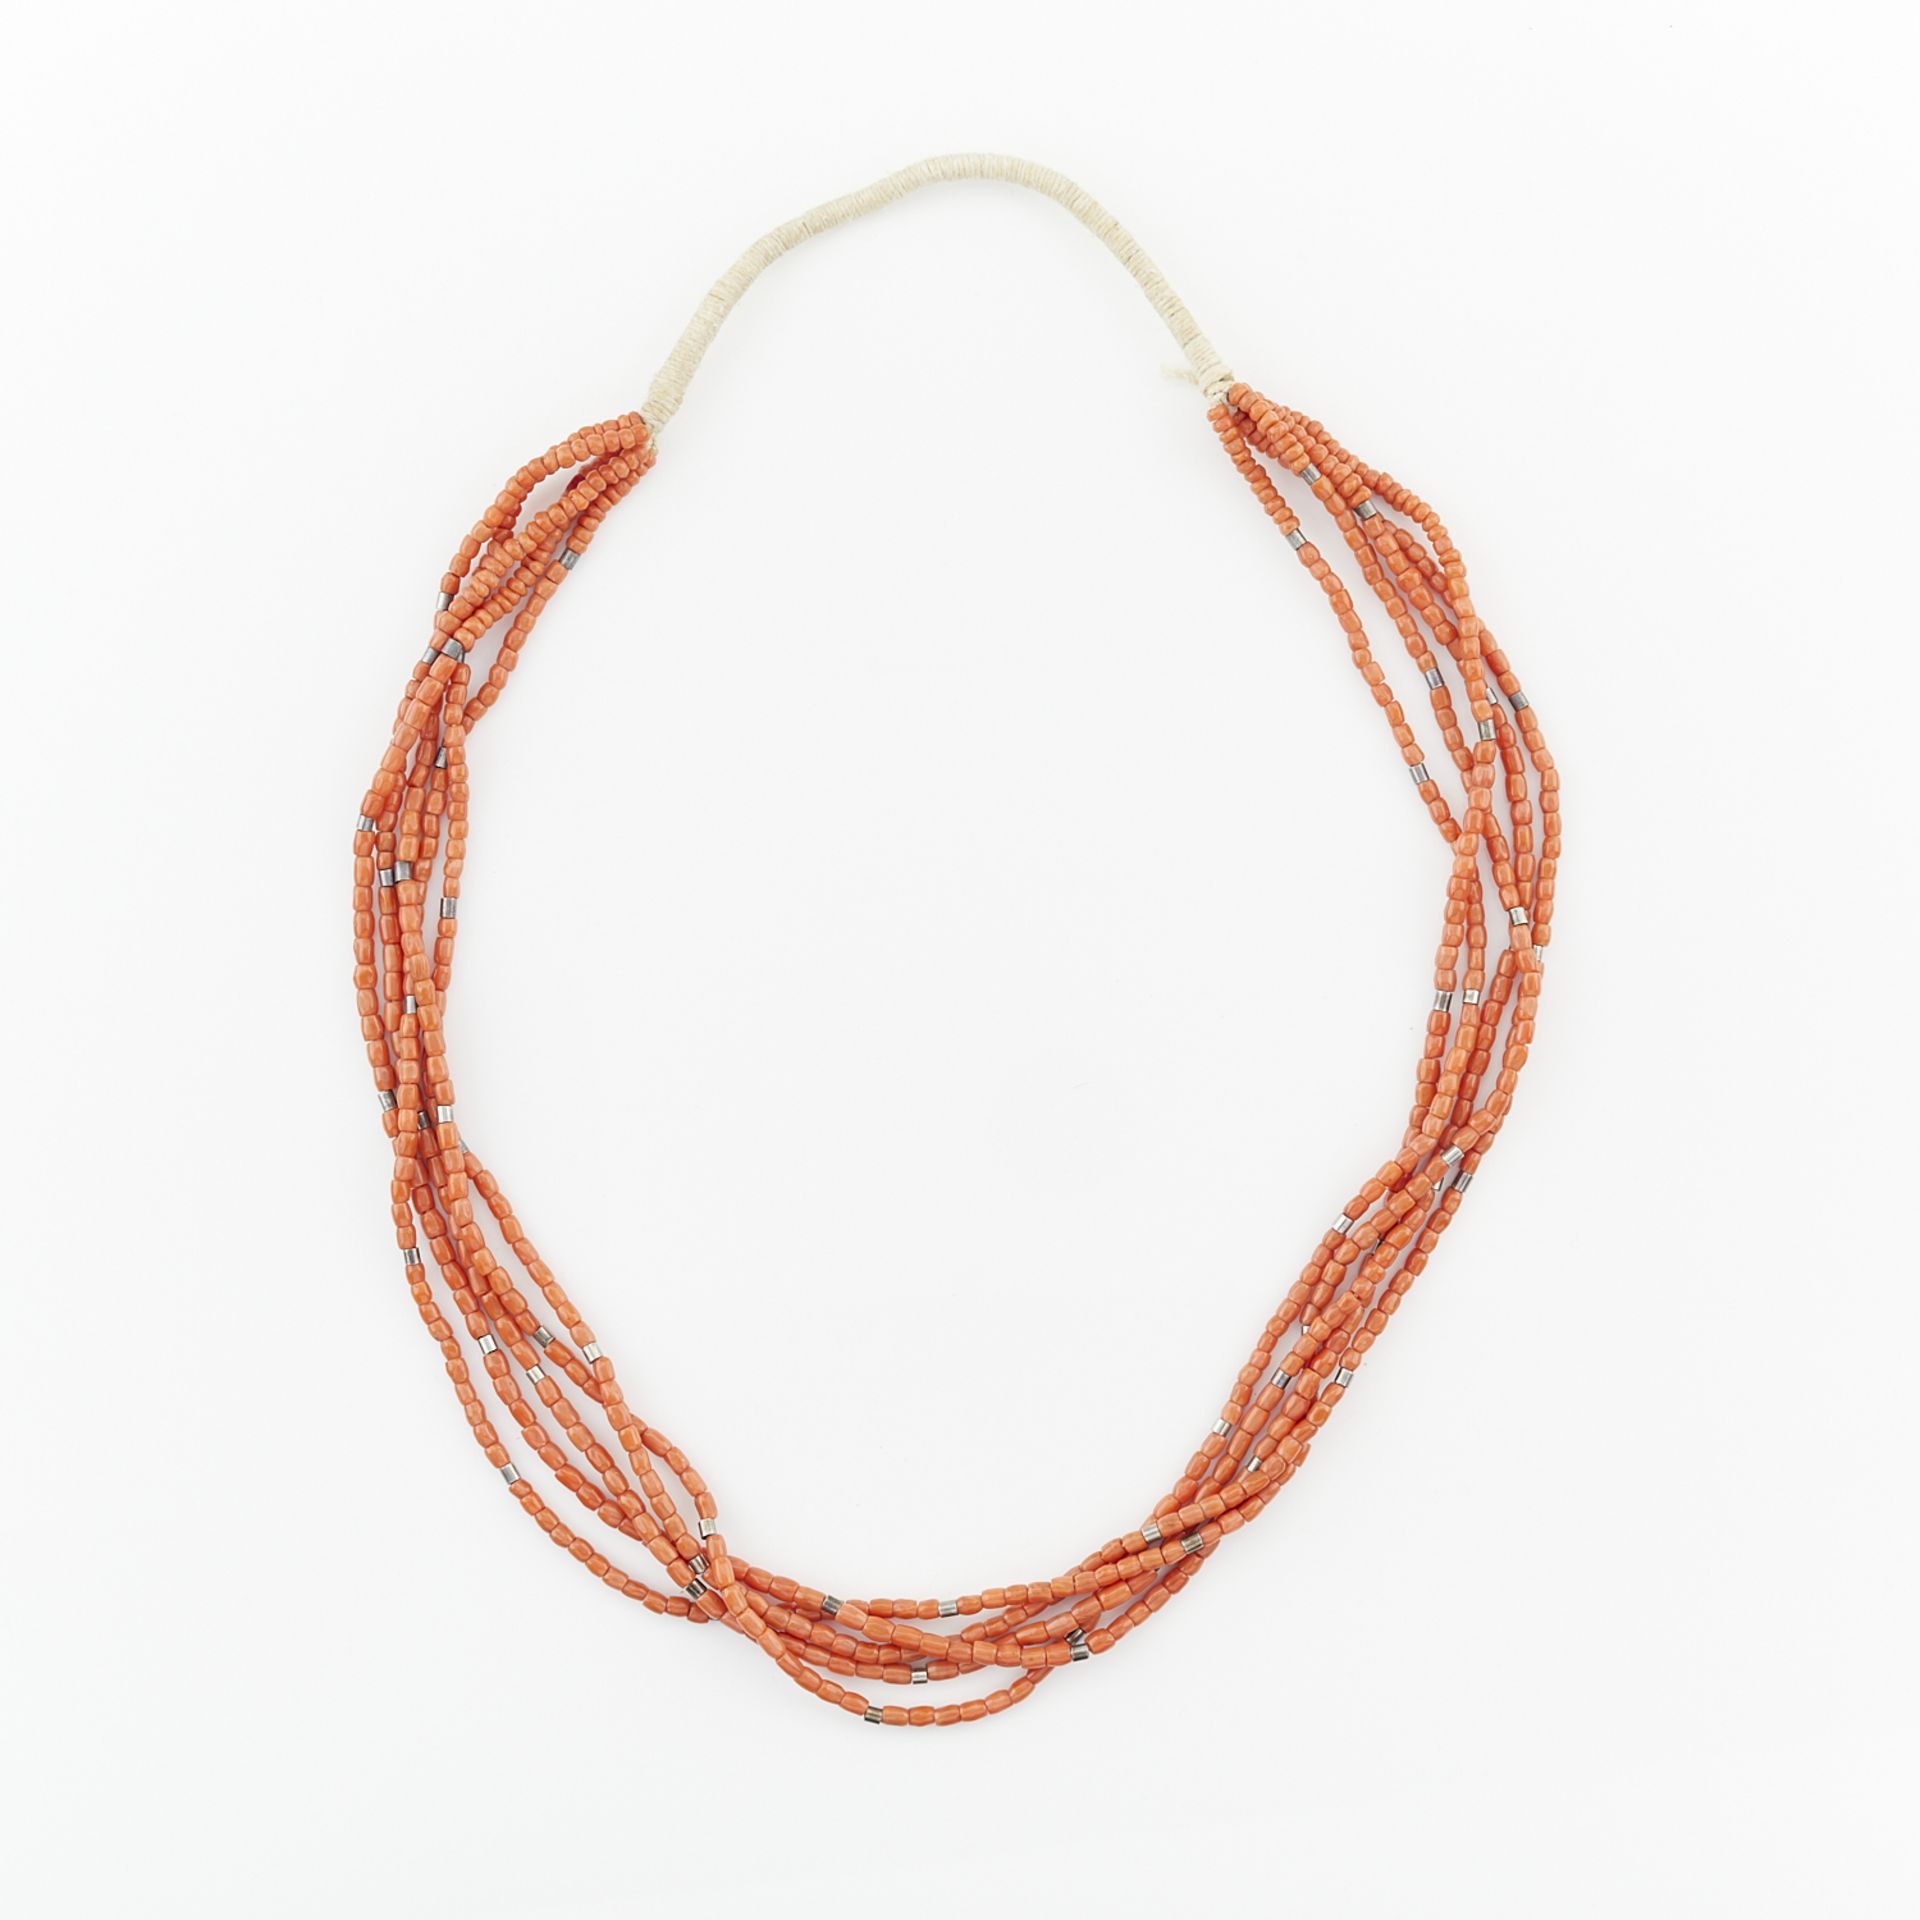 Five Strand Coral Heishi Necklace - Image 4 of 7